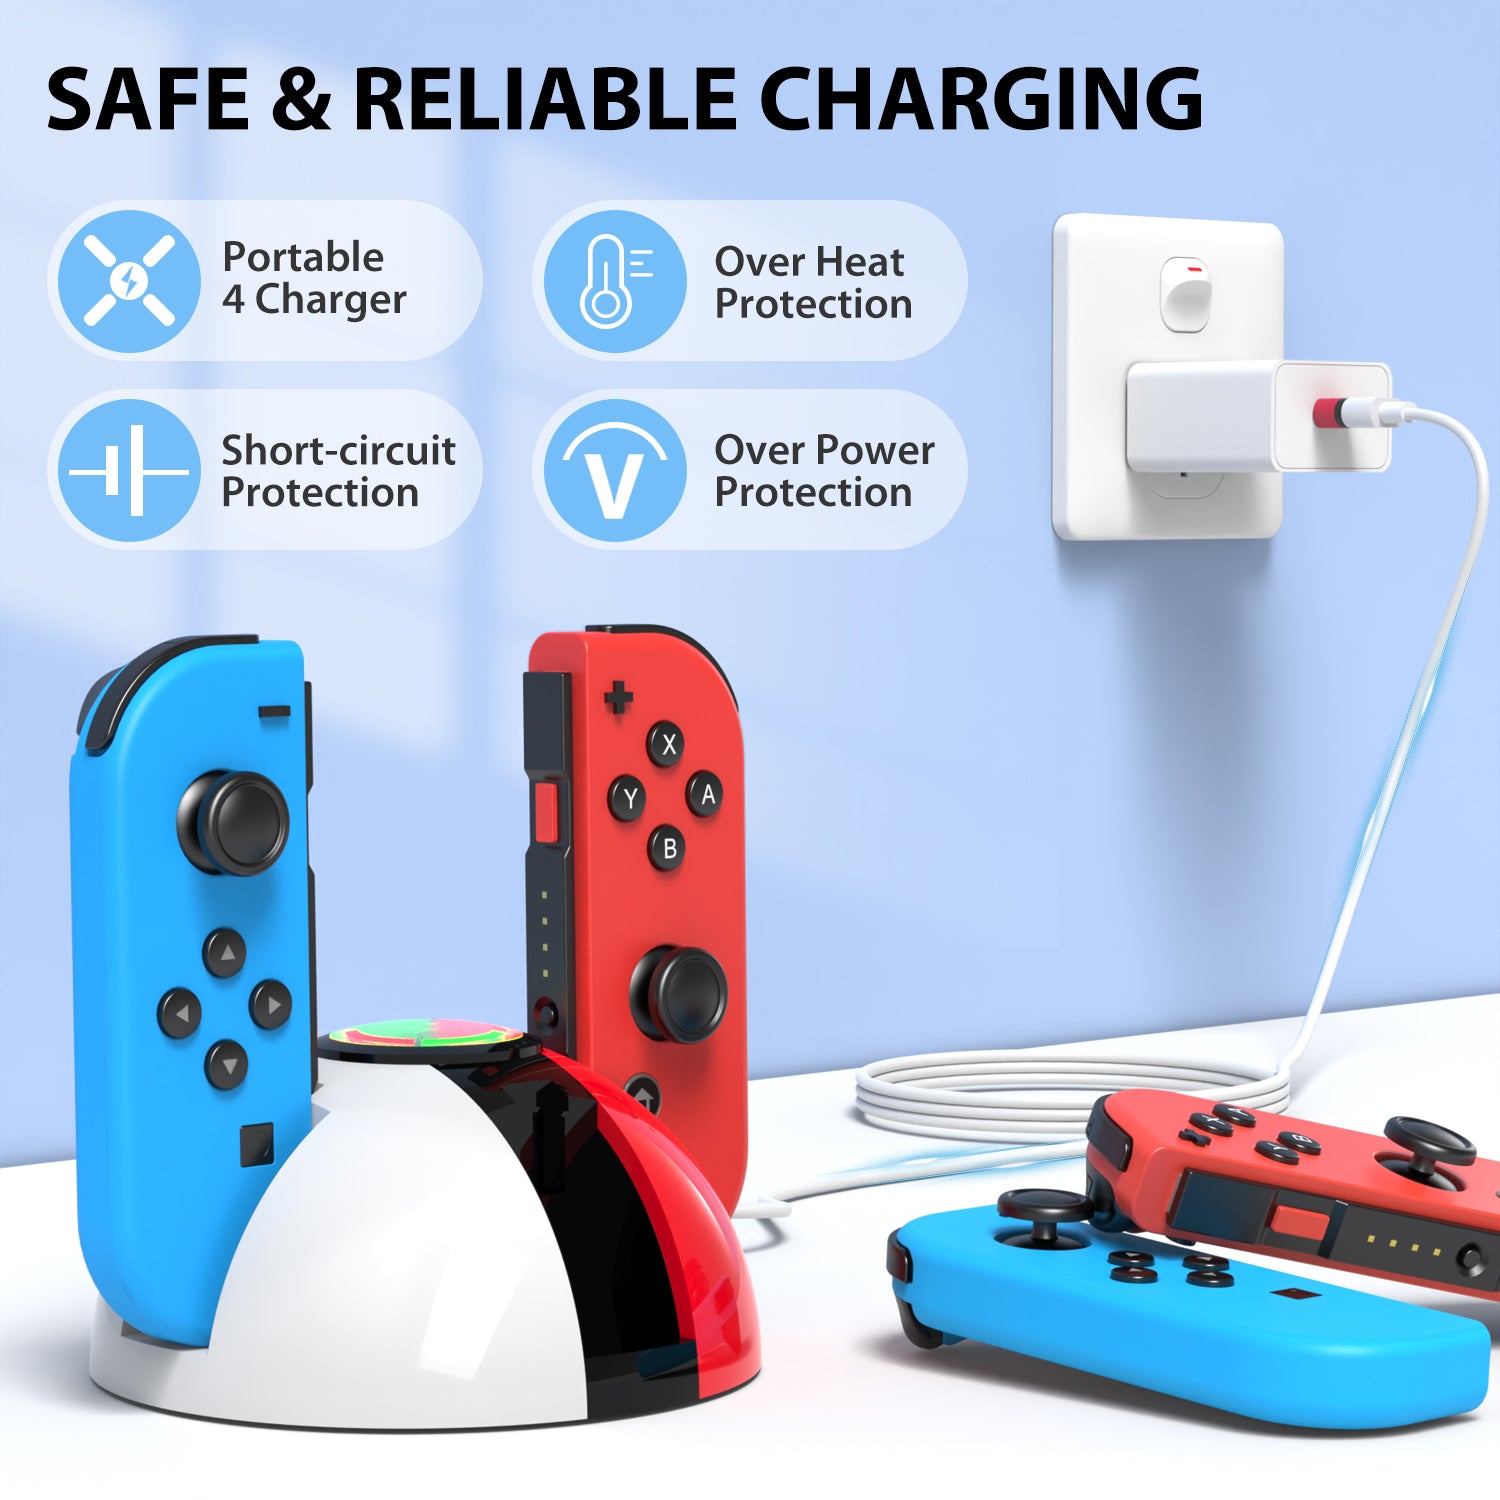 Switch Joy-con Charging Dock: Joy-con Stand with Cartoon Charging Cord